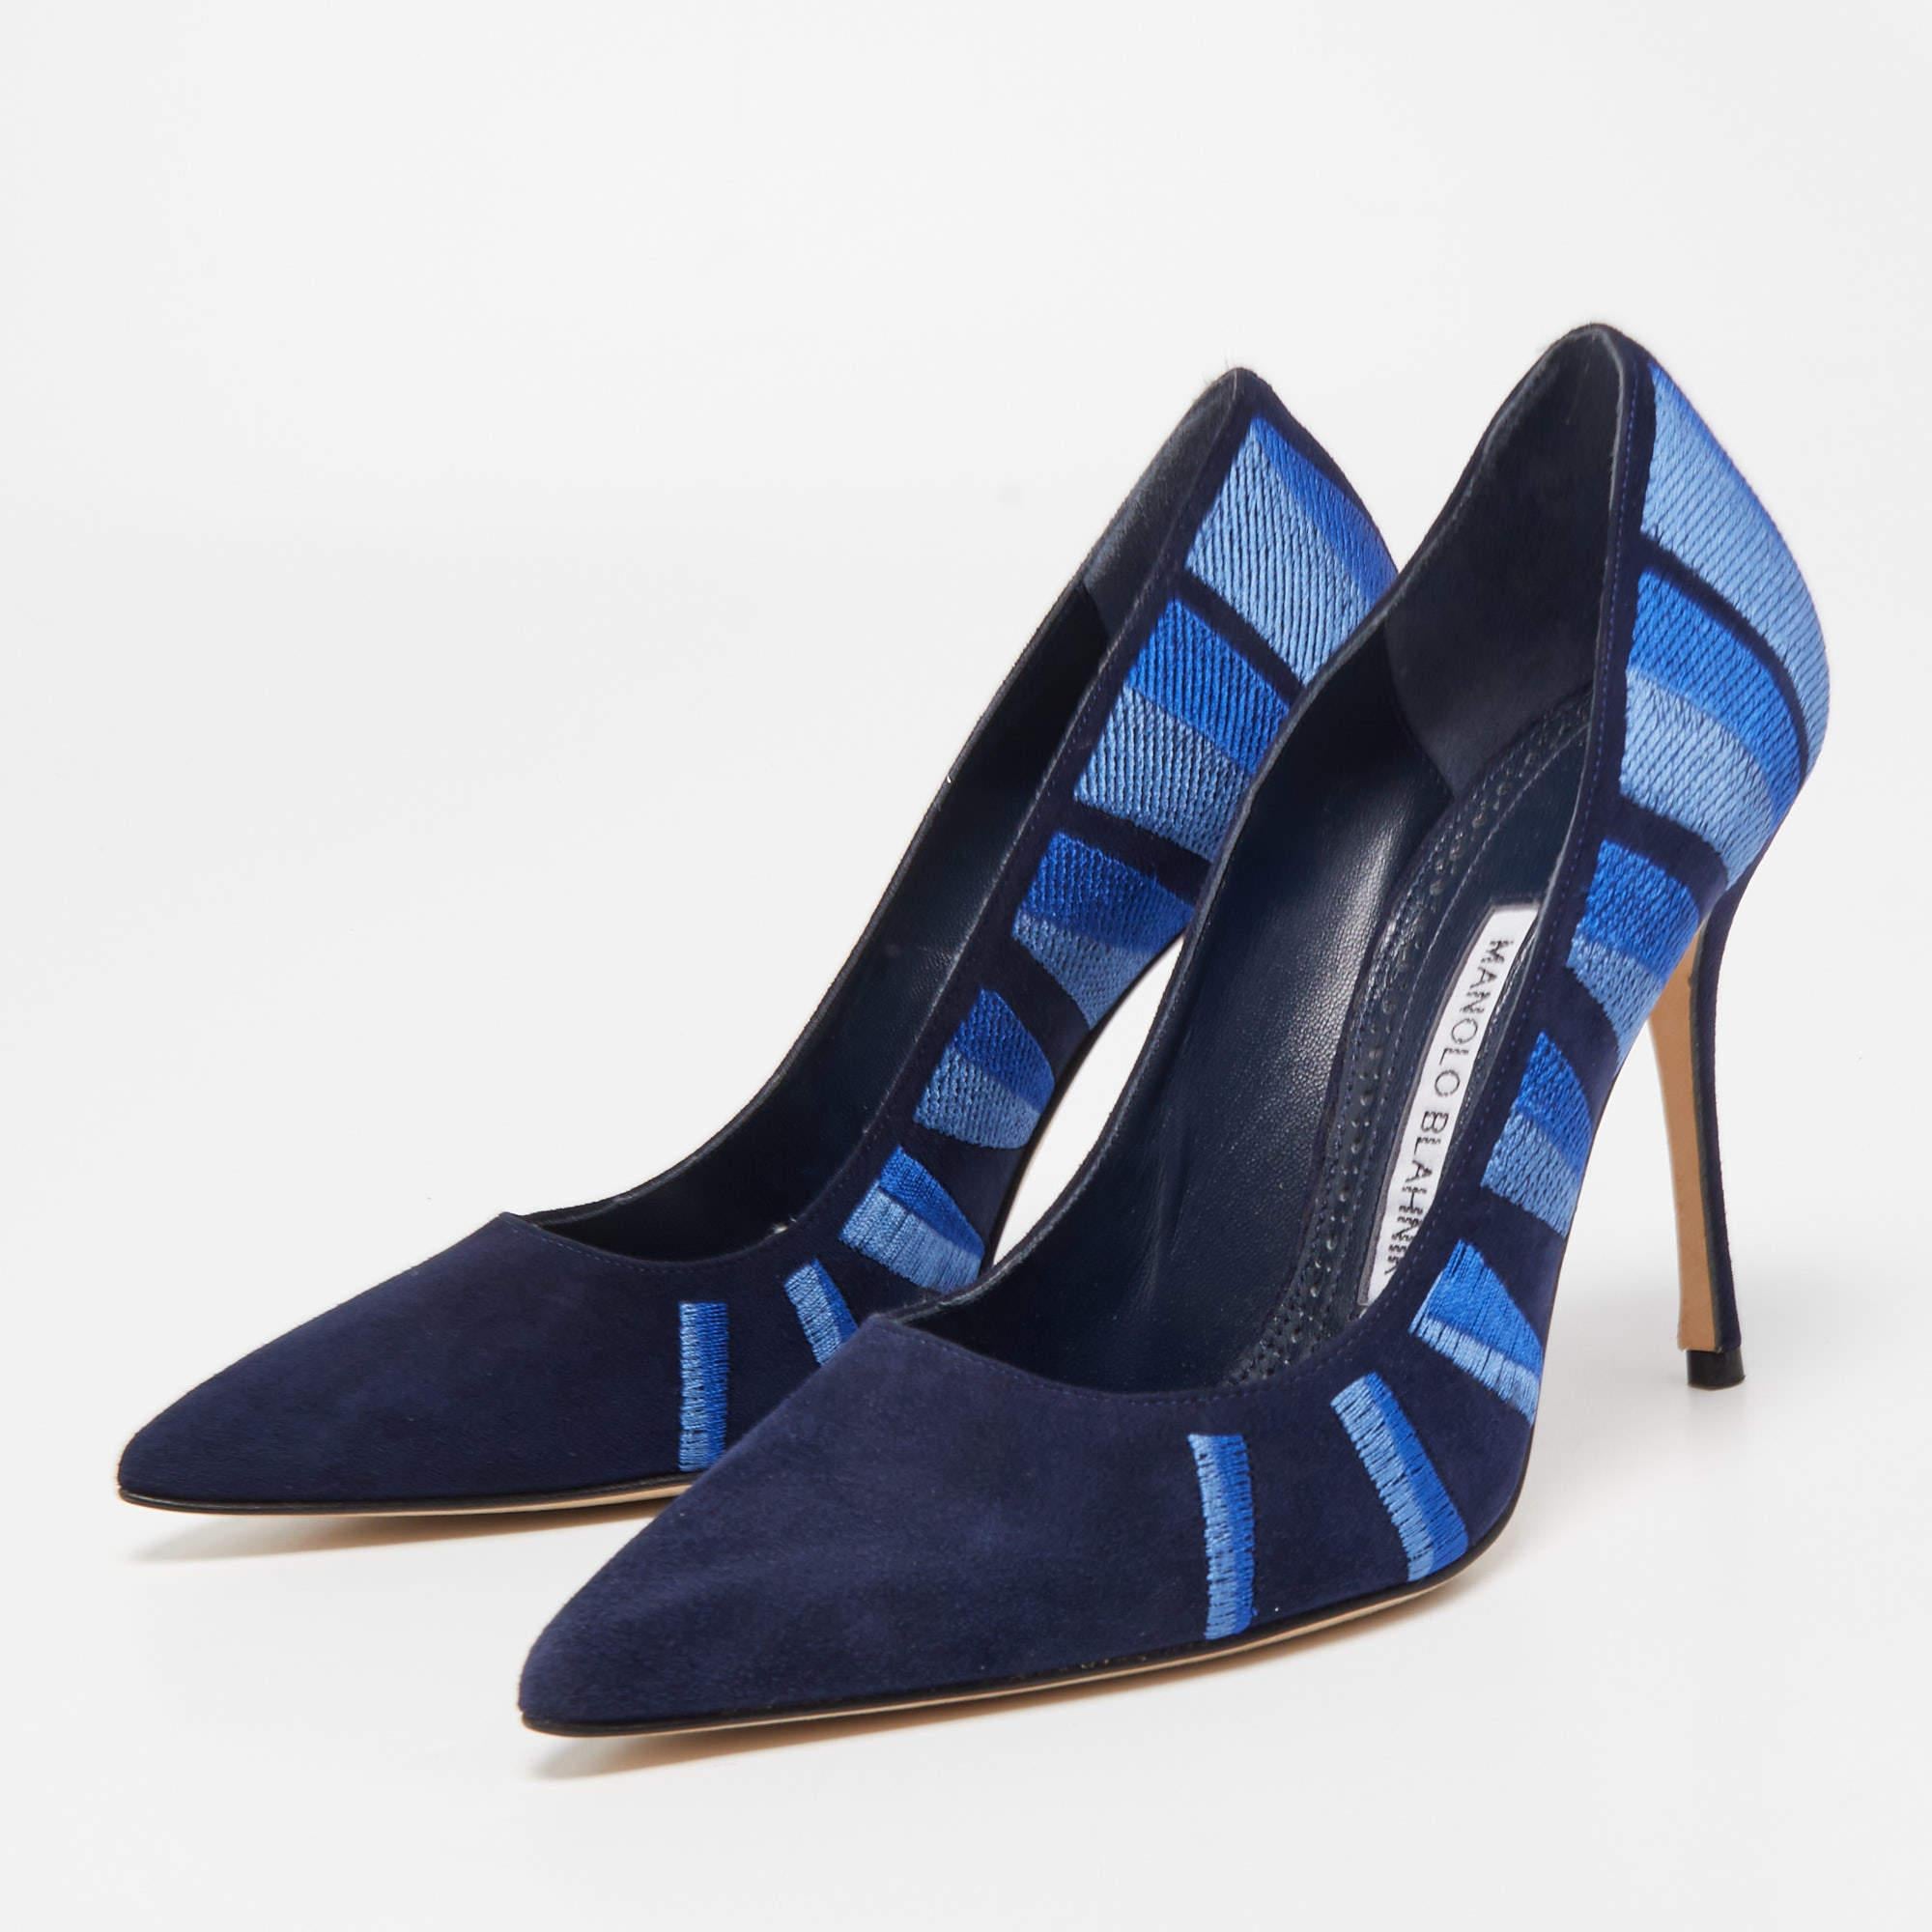 The Manolo Blahnik BB pumps are exquisite footwear crafted with luxurious blue suede and adorned with intricate embroidery. These pumps feature a classic pointed toe and a stiletto heel, combining elegance and style to create a timeless and